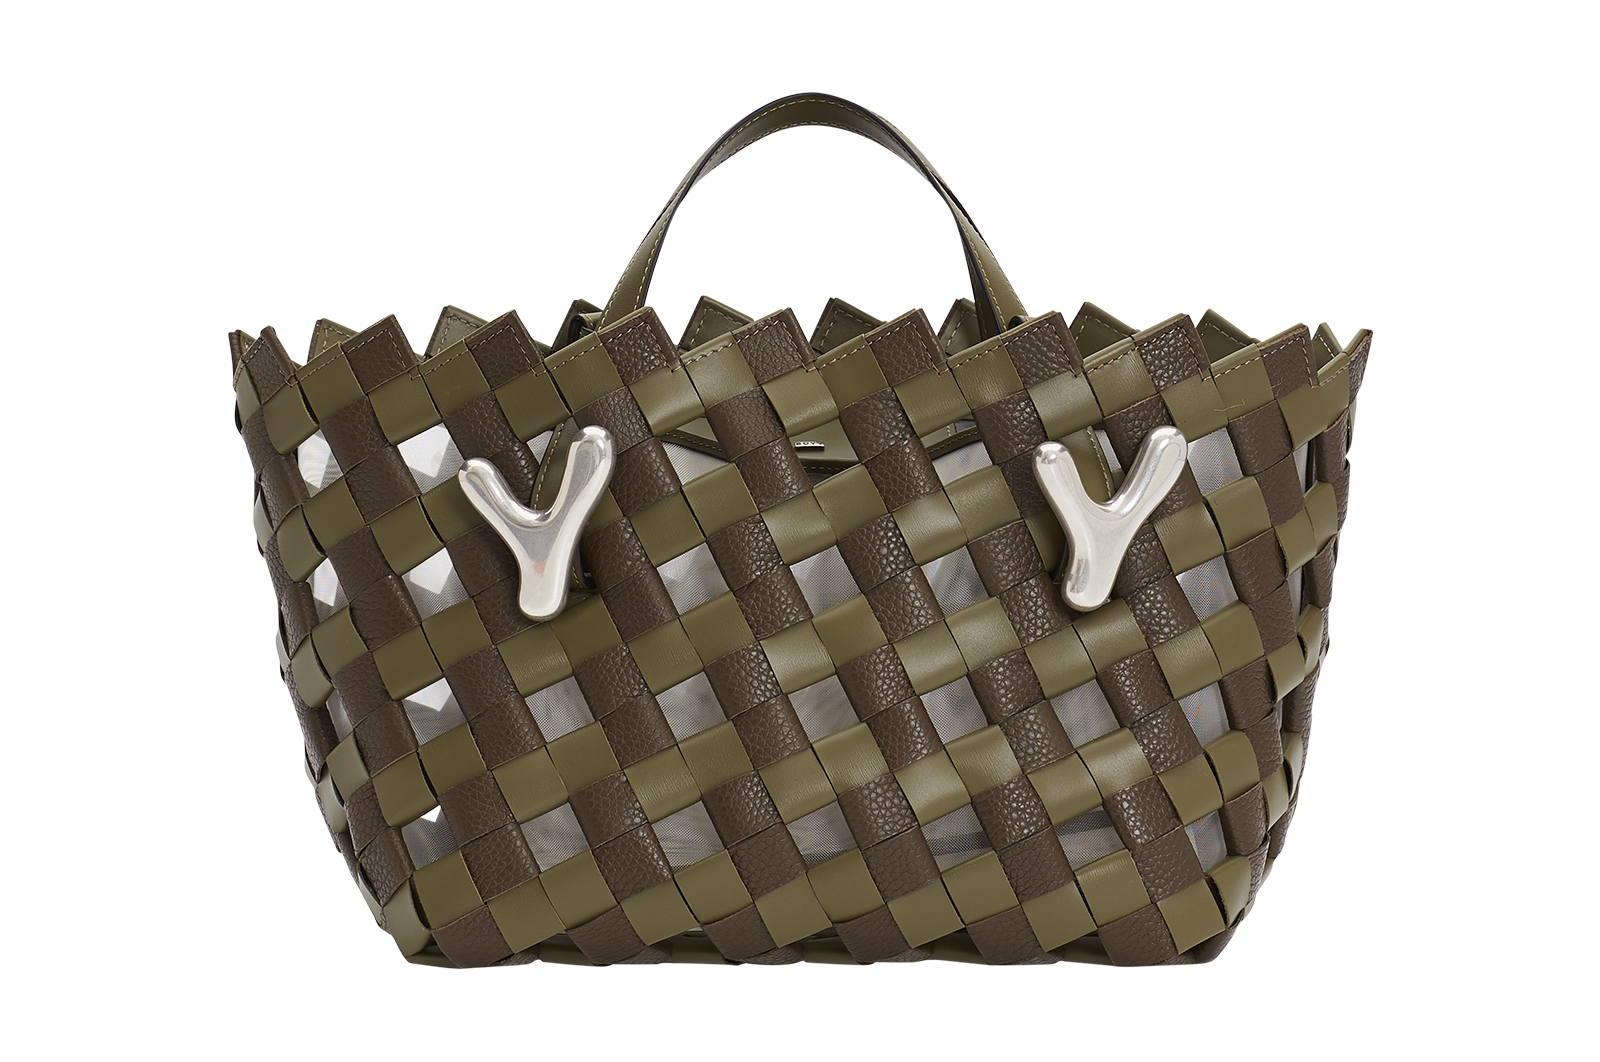 YY West 26 Woven Tote